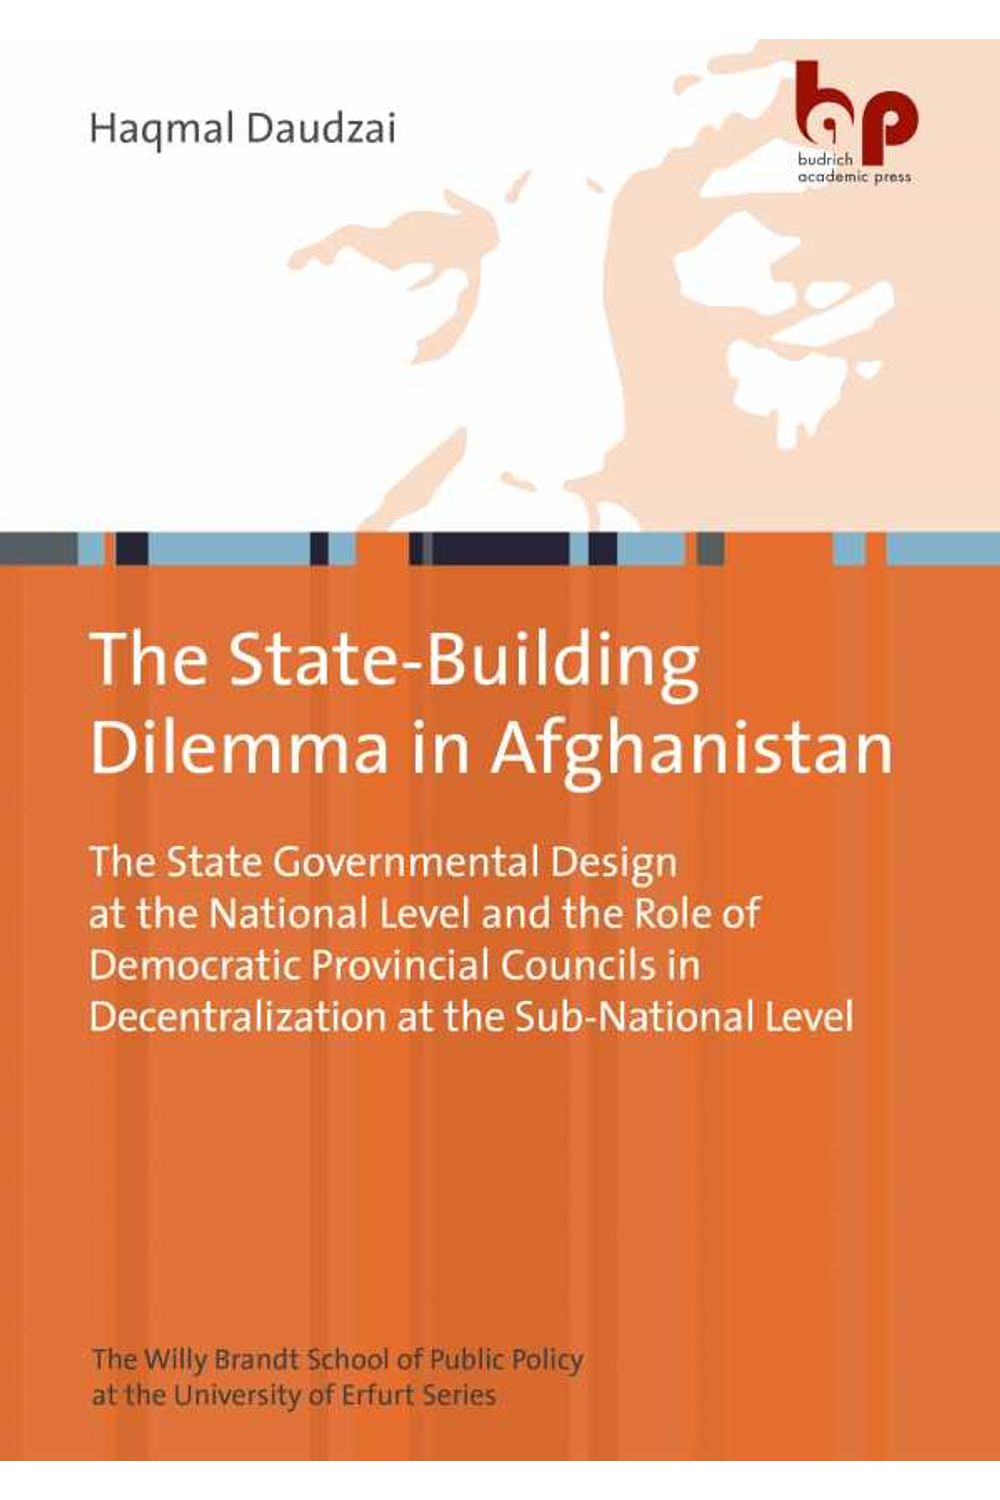 bw-the-statebuilding-dilemma-in-afghanistan-budrich-academic-press-9783966659505